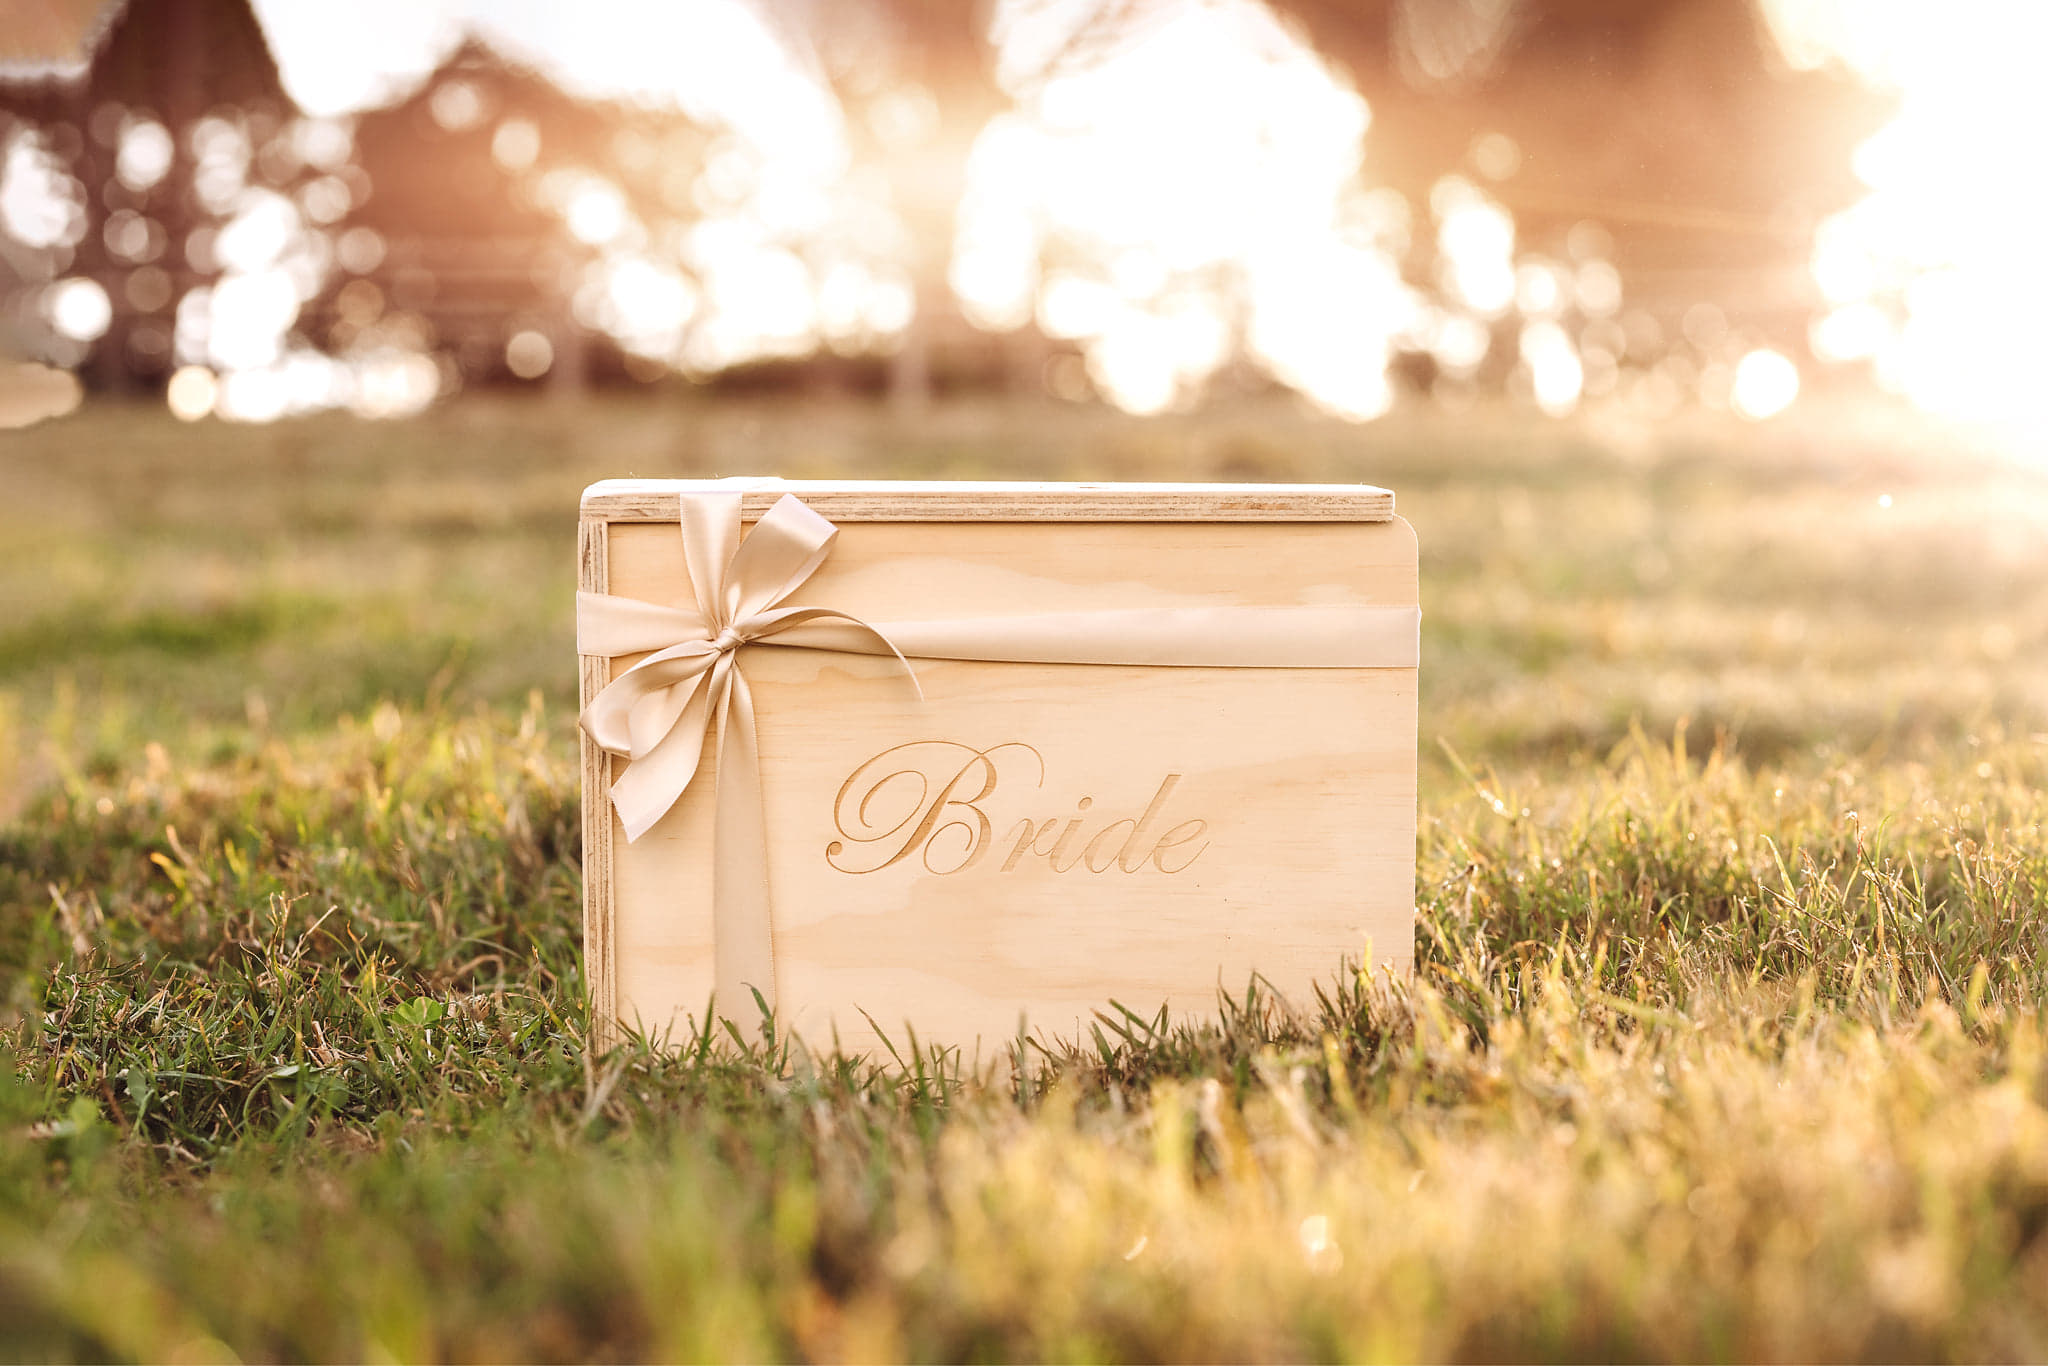 A "Bride" engraved wooden gift box by The Bridal Box Co.